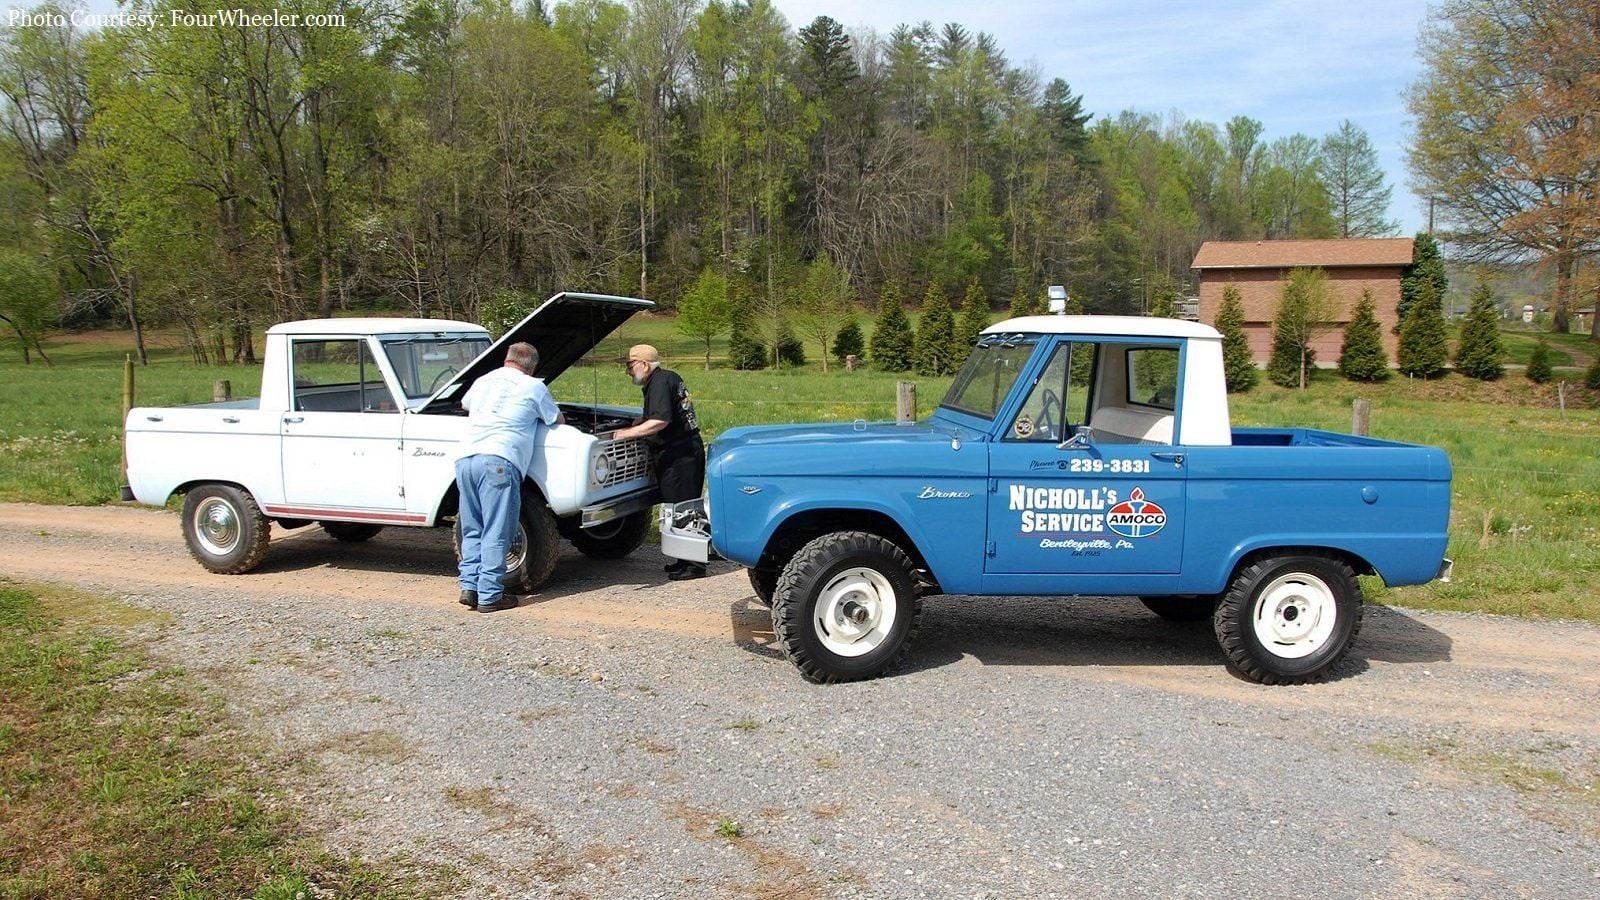 1967 Service Bronco Is Here To Save The Day Ford Trucks